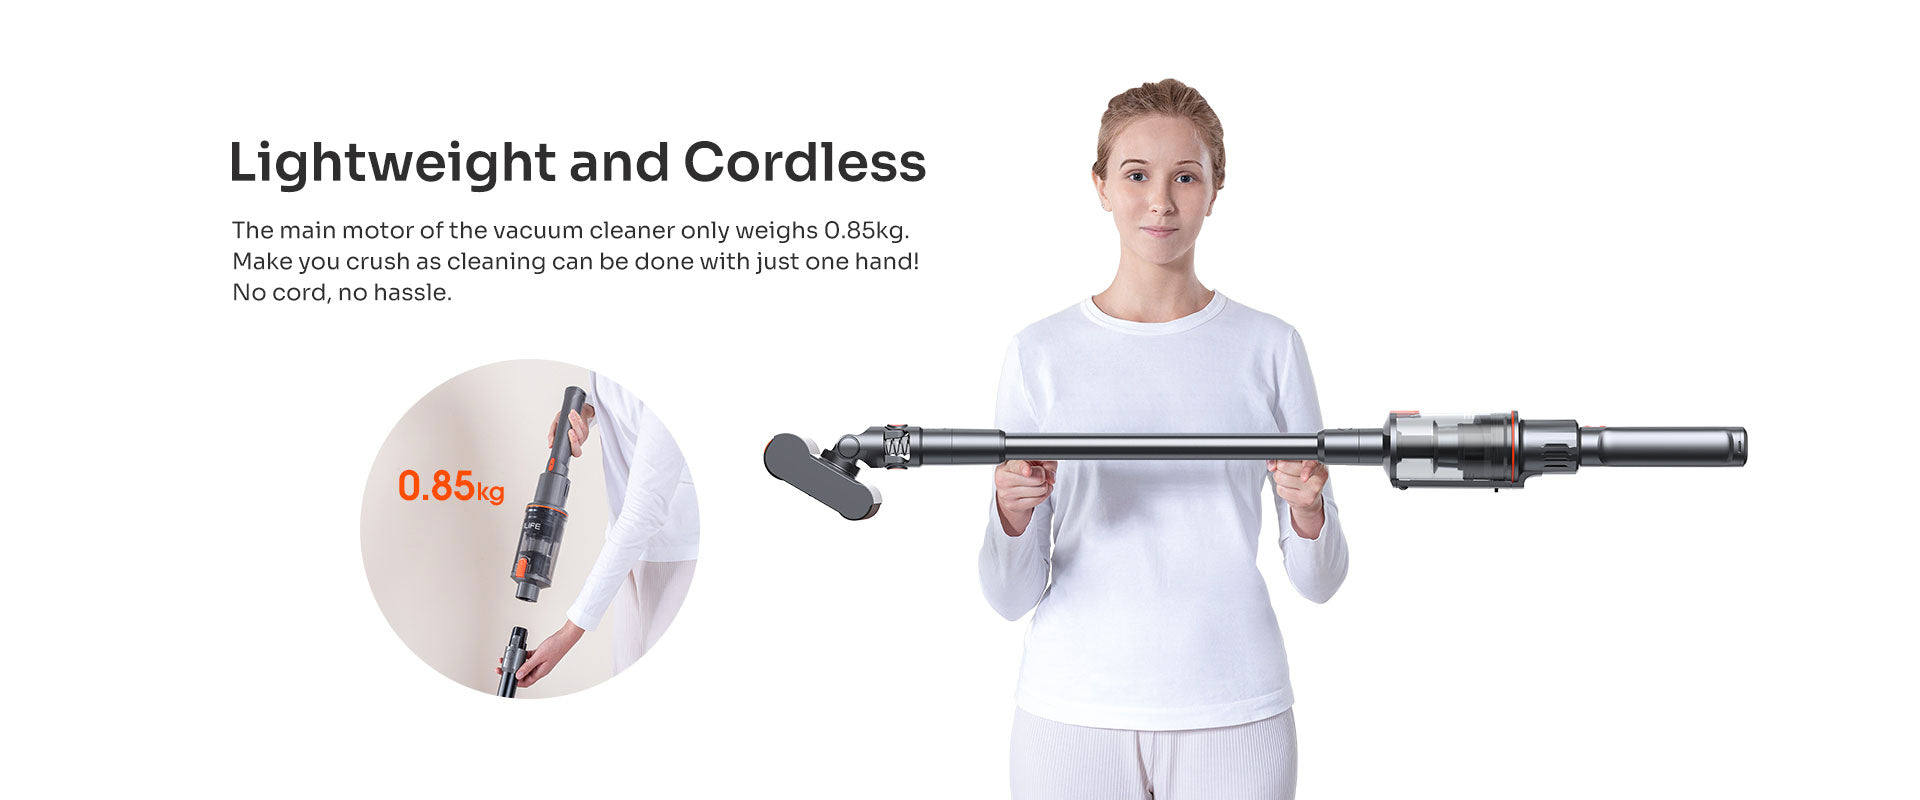 Lightweight and cordless